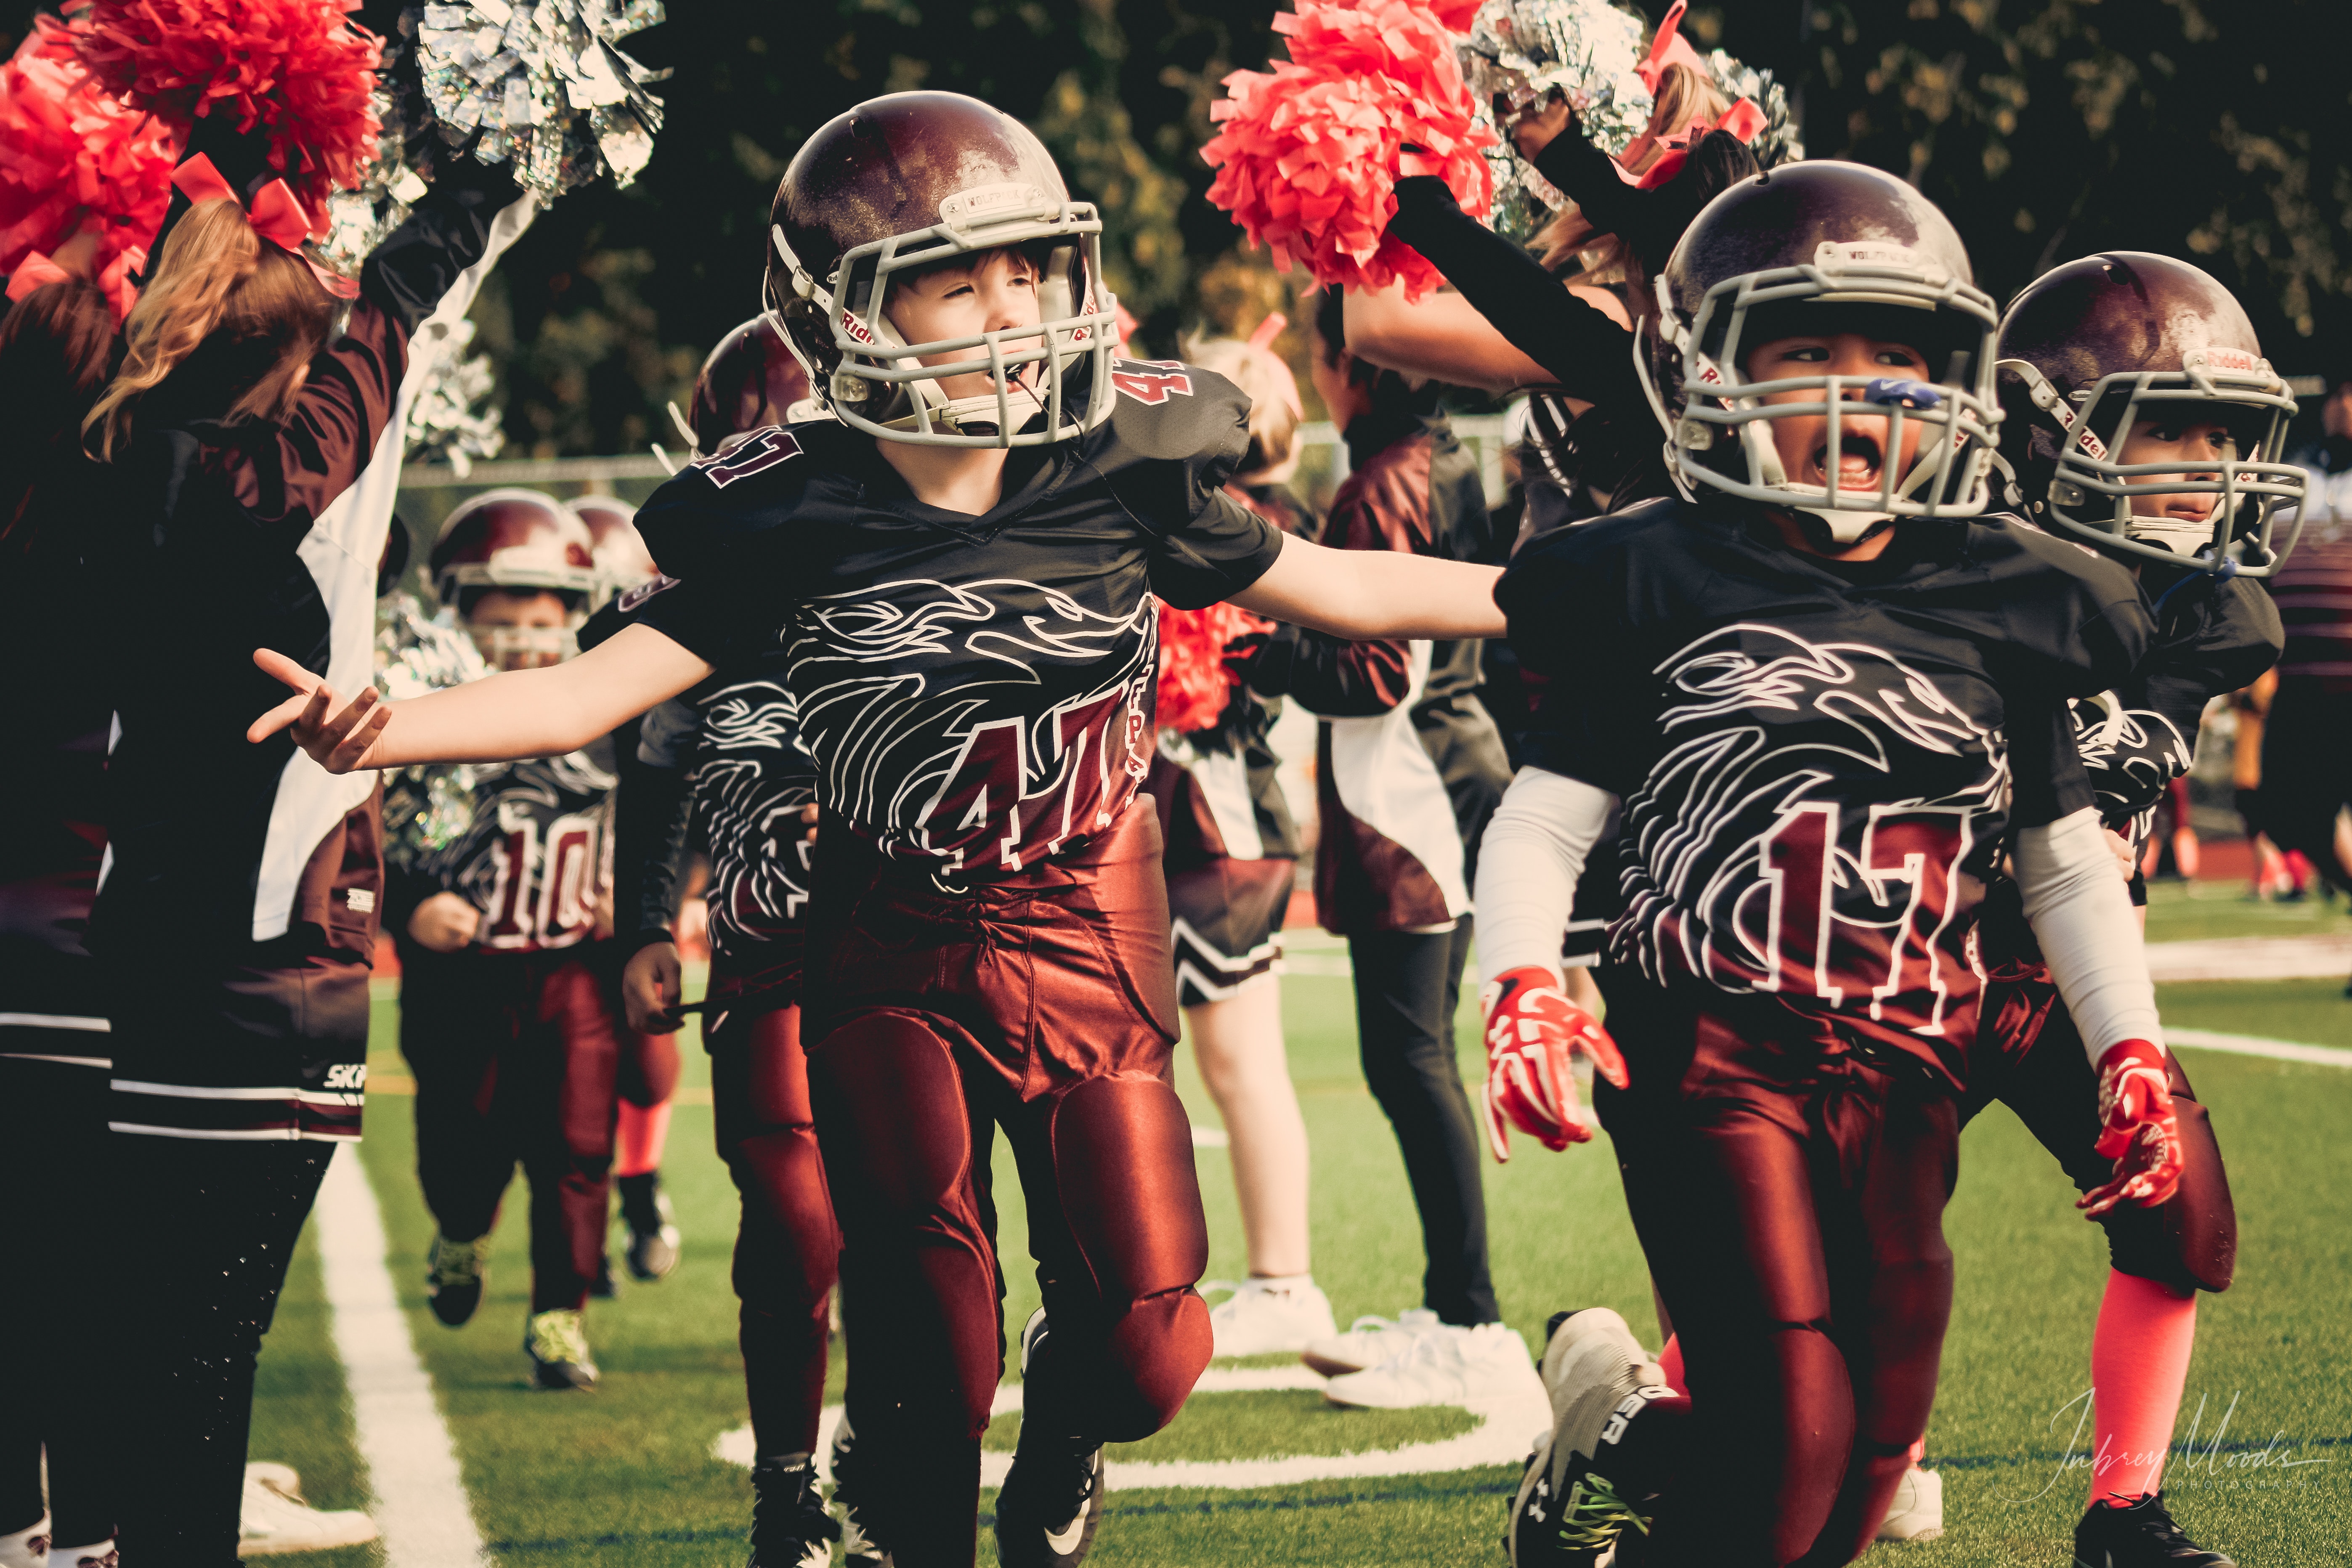 Children in White and Red Football Outfit, Action, Kids, Uniform, Touchdown, HQ Photo